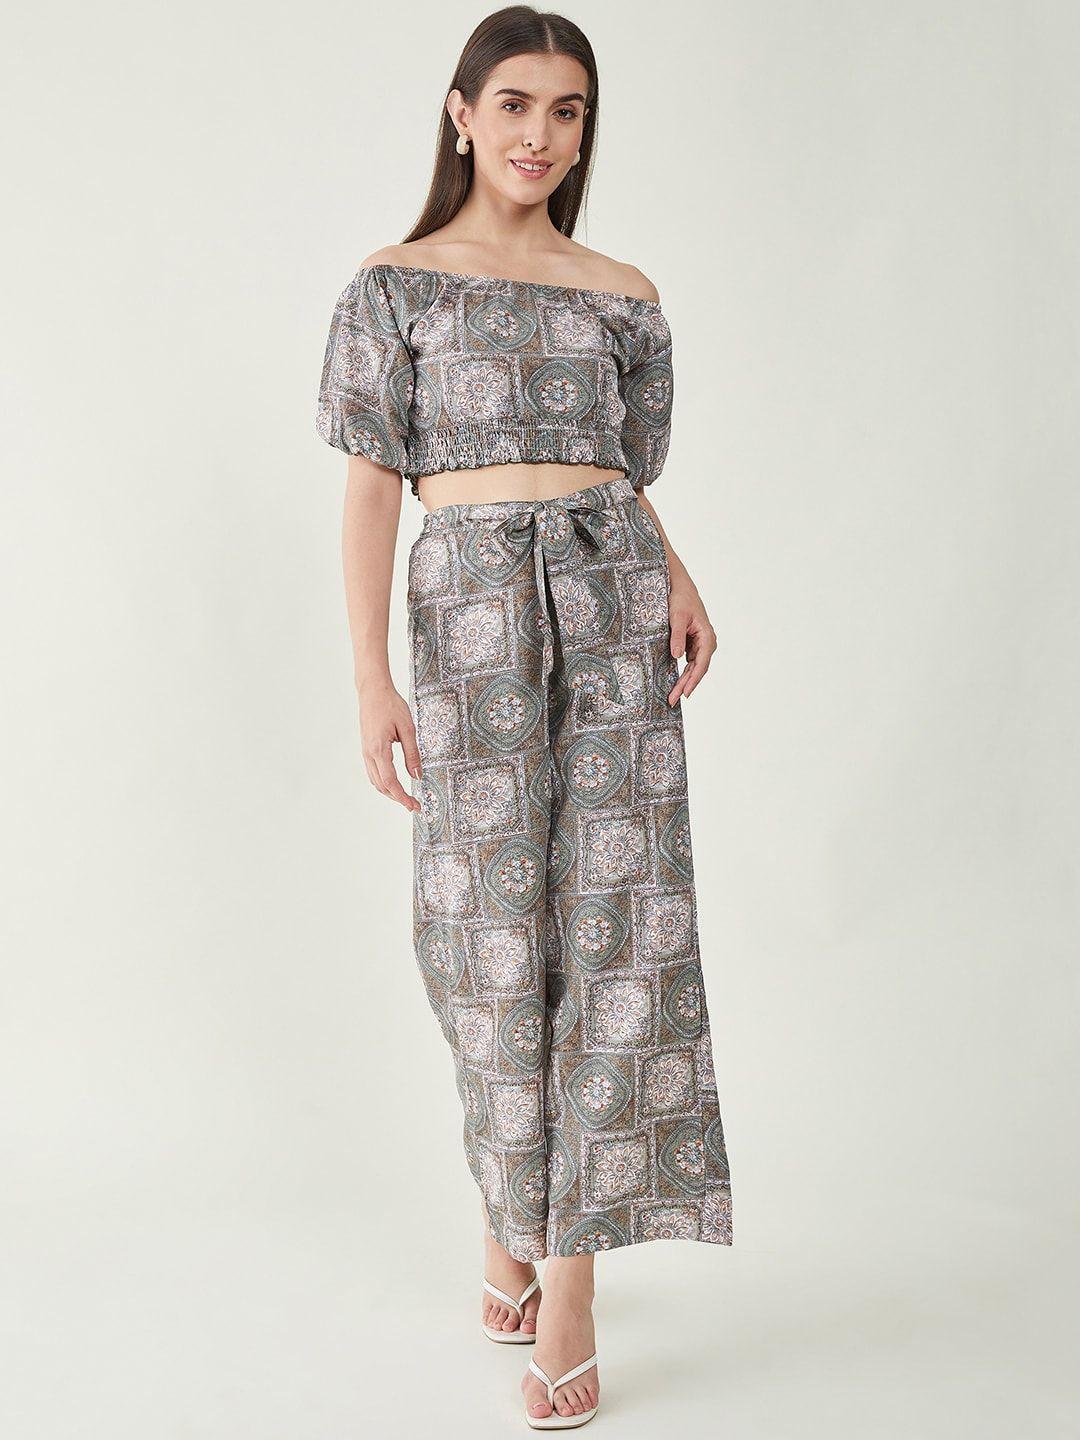 bitterlime printed off-shoulder-neck top with printed  palazzos